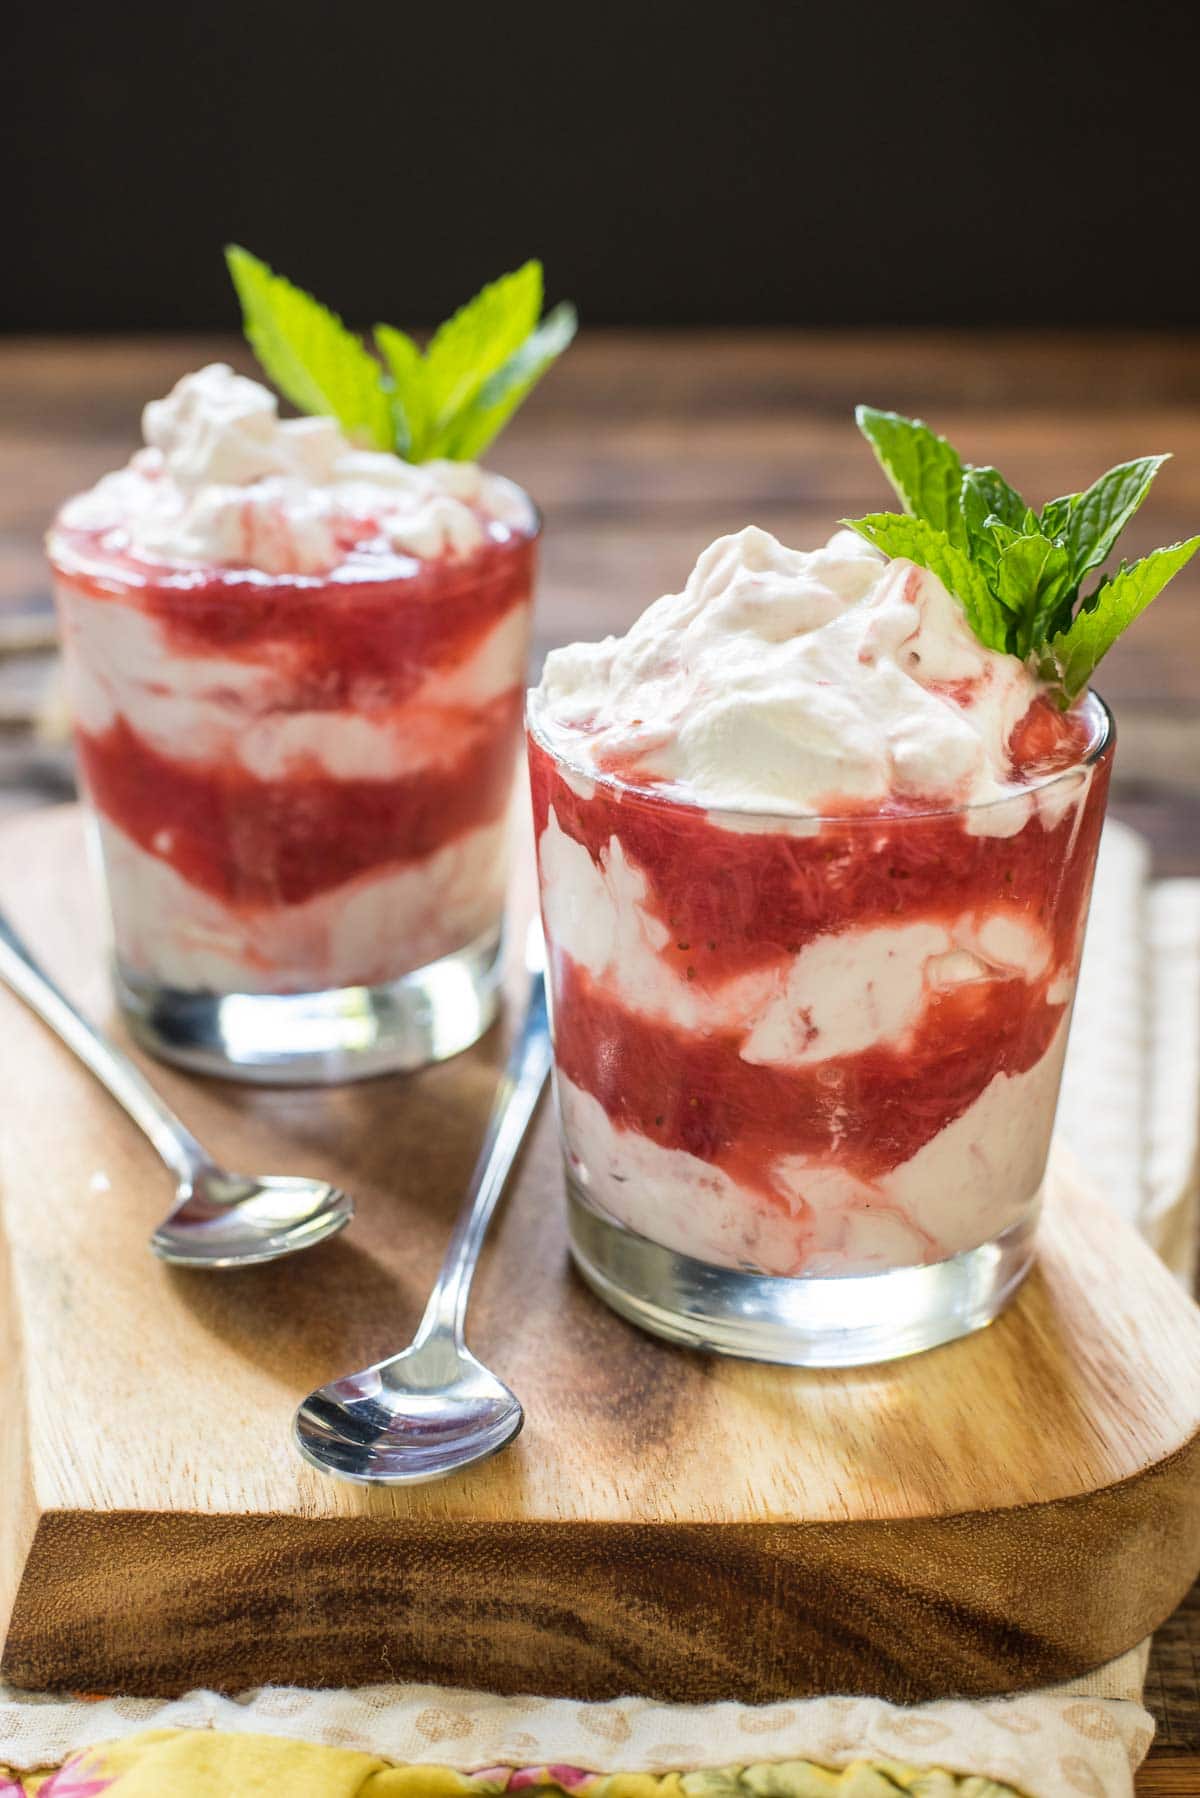 This Strawberry Rhubarb Fool is a no bake dessert that's light, airy, and perfect for summer!